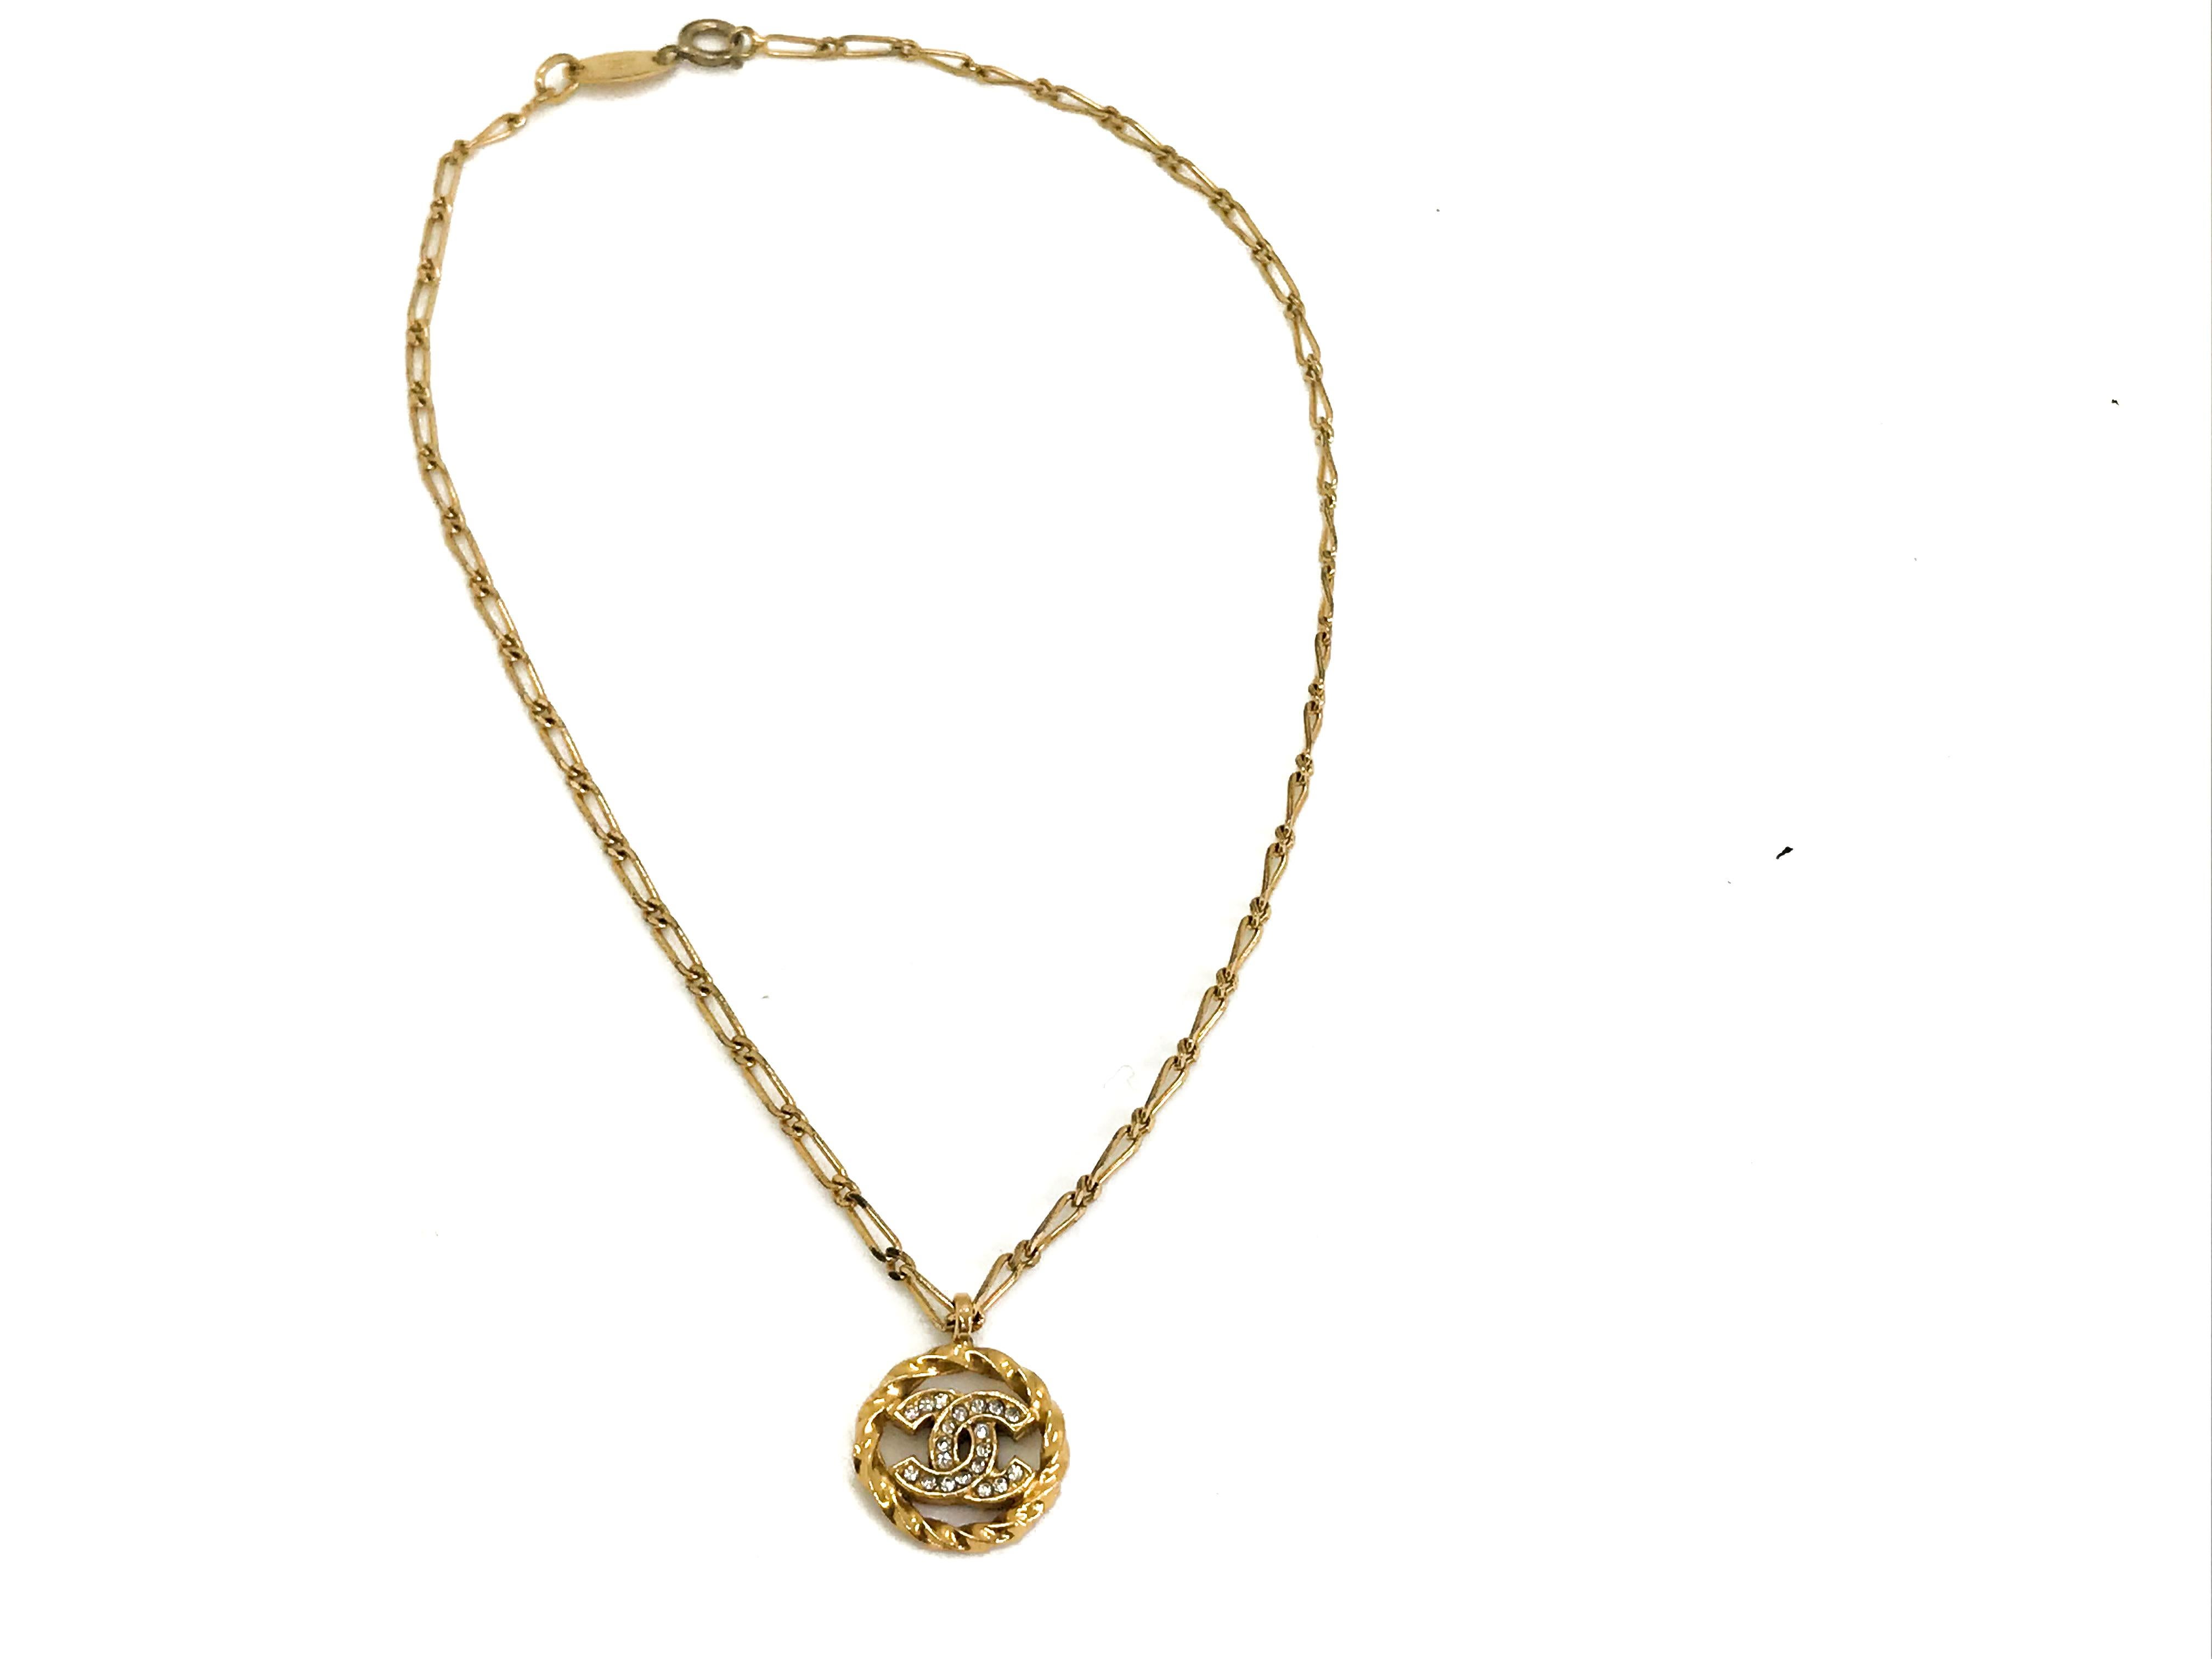 Chanel 80s Vintage CC logo pendant necklace with delicate chain.  Made in 1982.  Features the classic Chanel Made in France 1982 hangtag which is attached to the chain.

A delicate, versatile piece which will see you from desk to dance floor.

Chain